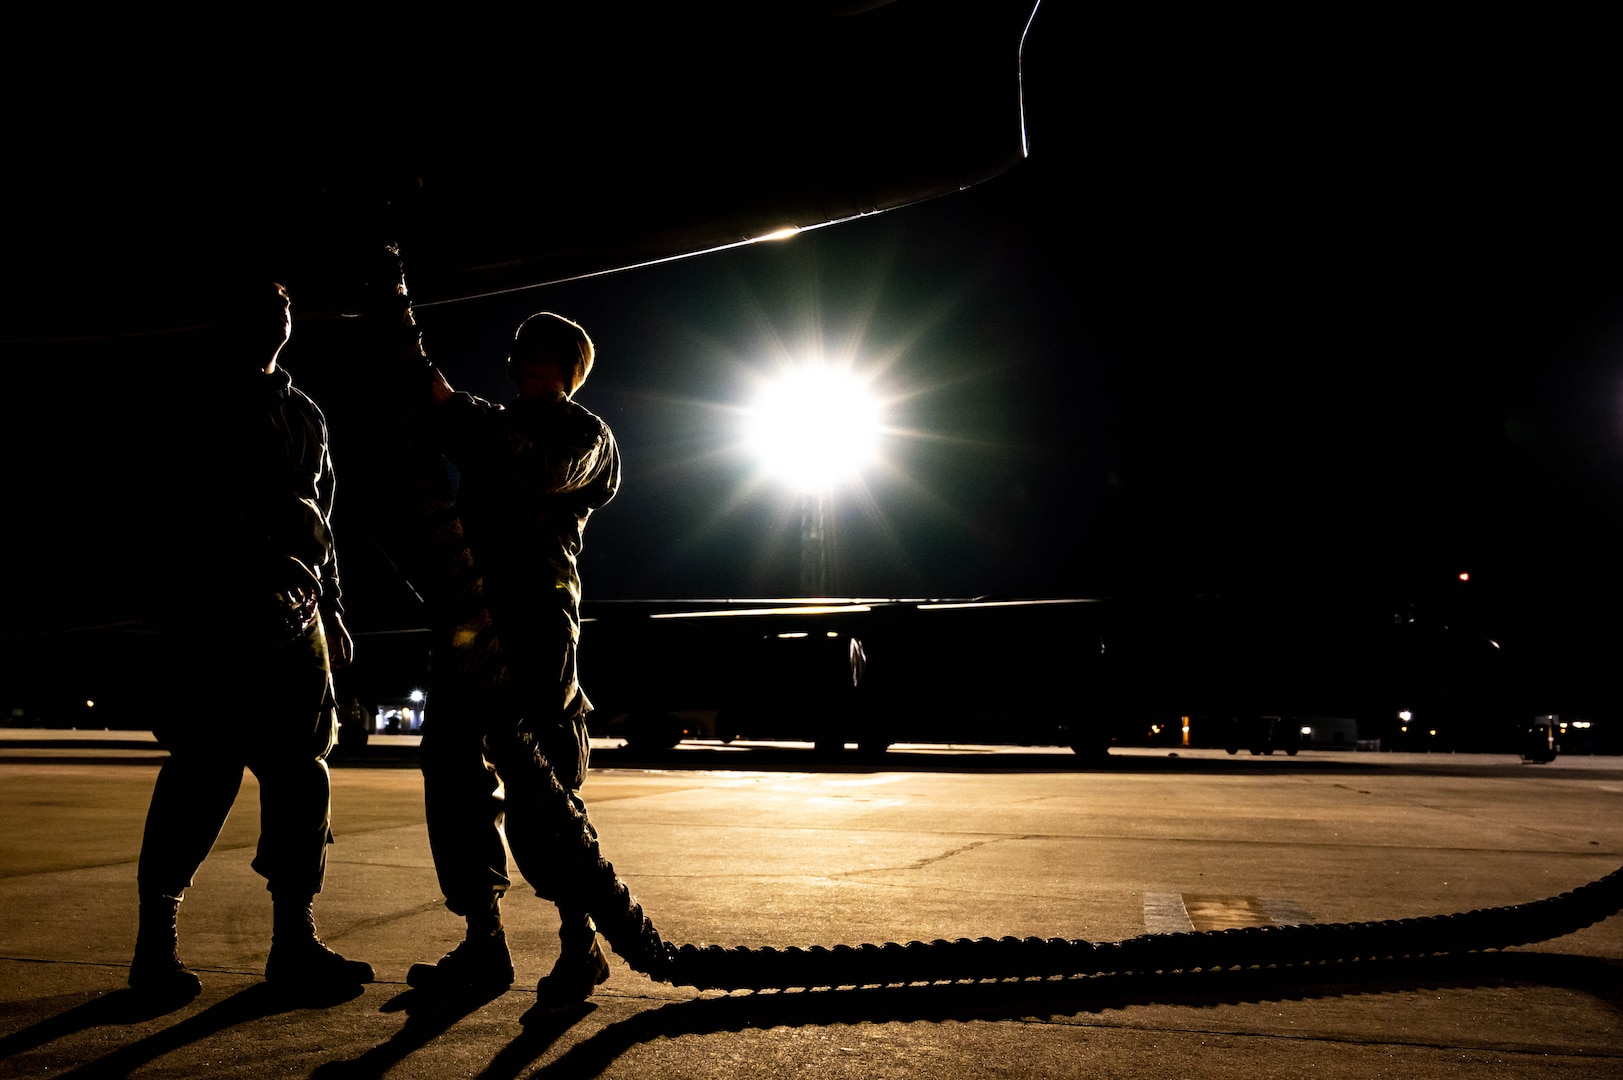 Crew chiefs assigned to the 23rd Expeditionary Bomb Squadron, prepare a B-52H Stratofortress for takeoff at Morón Air Base, Spain, Feb. 28, 2023. U.S. Strategic Command forces are on watch 24/7/365 to deter and detect strategic attacks against the U.S. and our Allies. (U.S. Air Force photo by Airman 1st Class Alexander Nottingham)